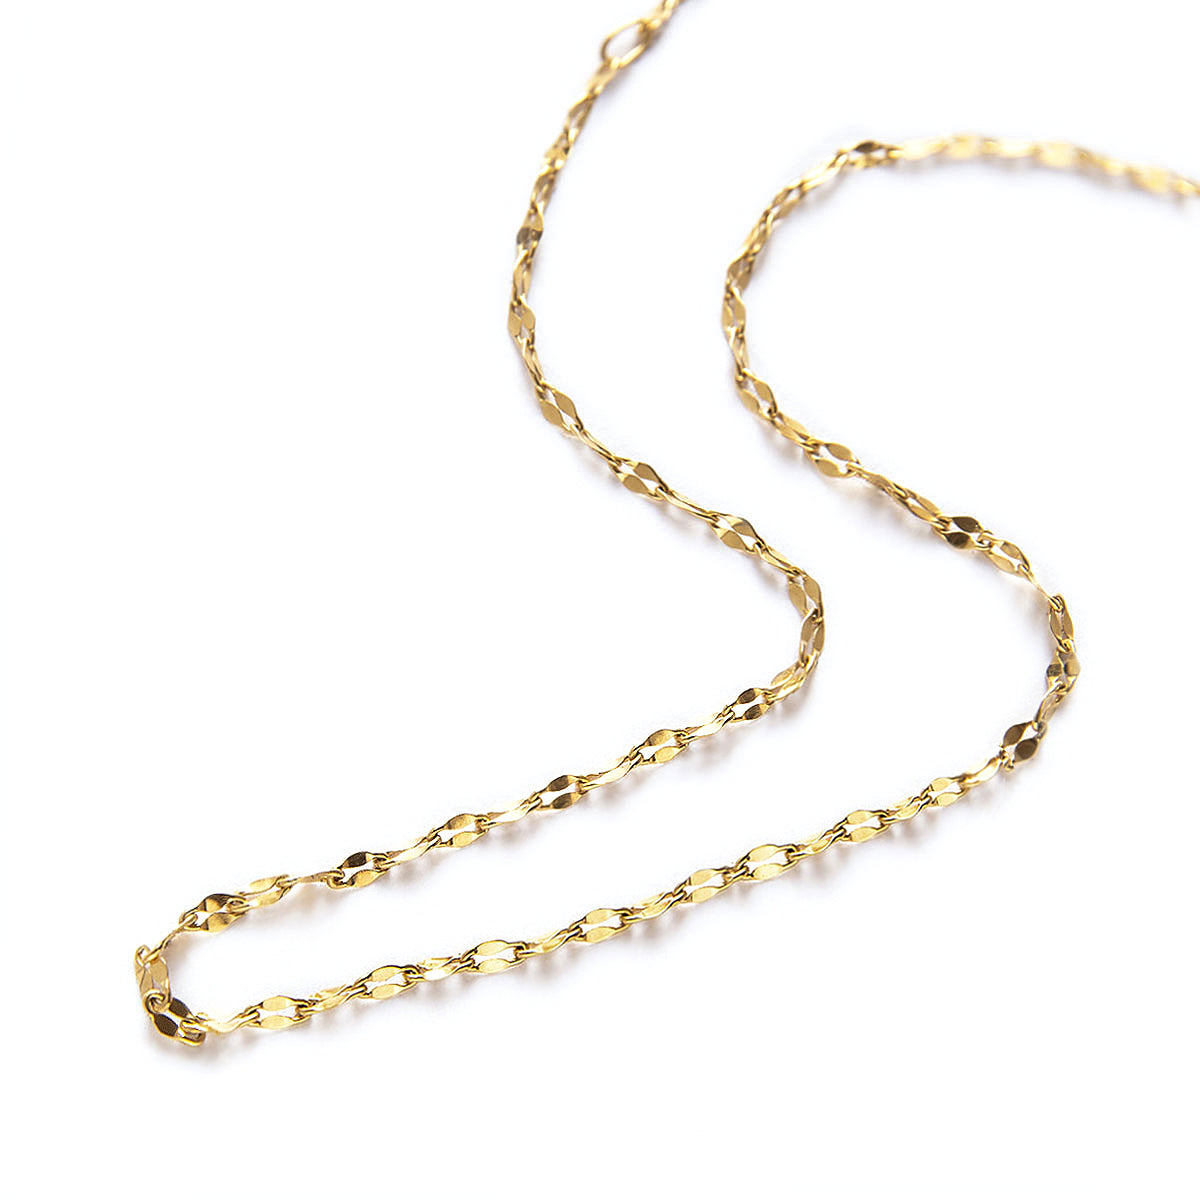 Gold Link Chain Choker Necklace